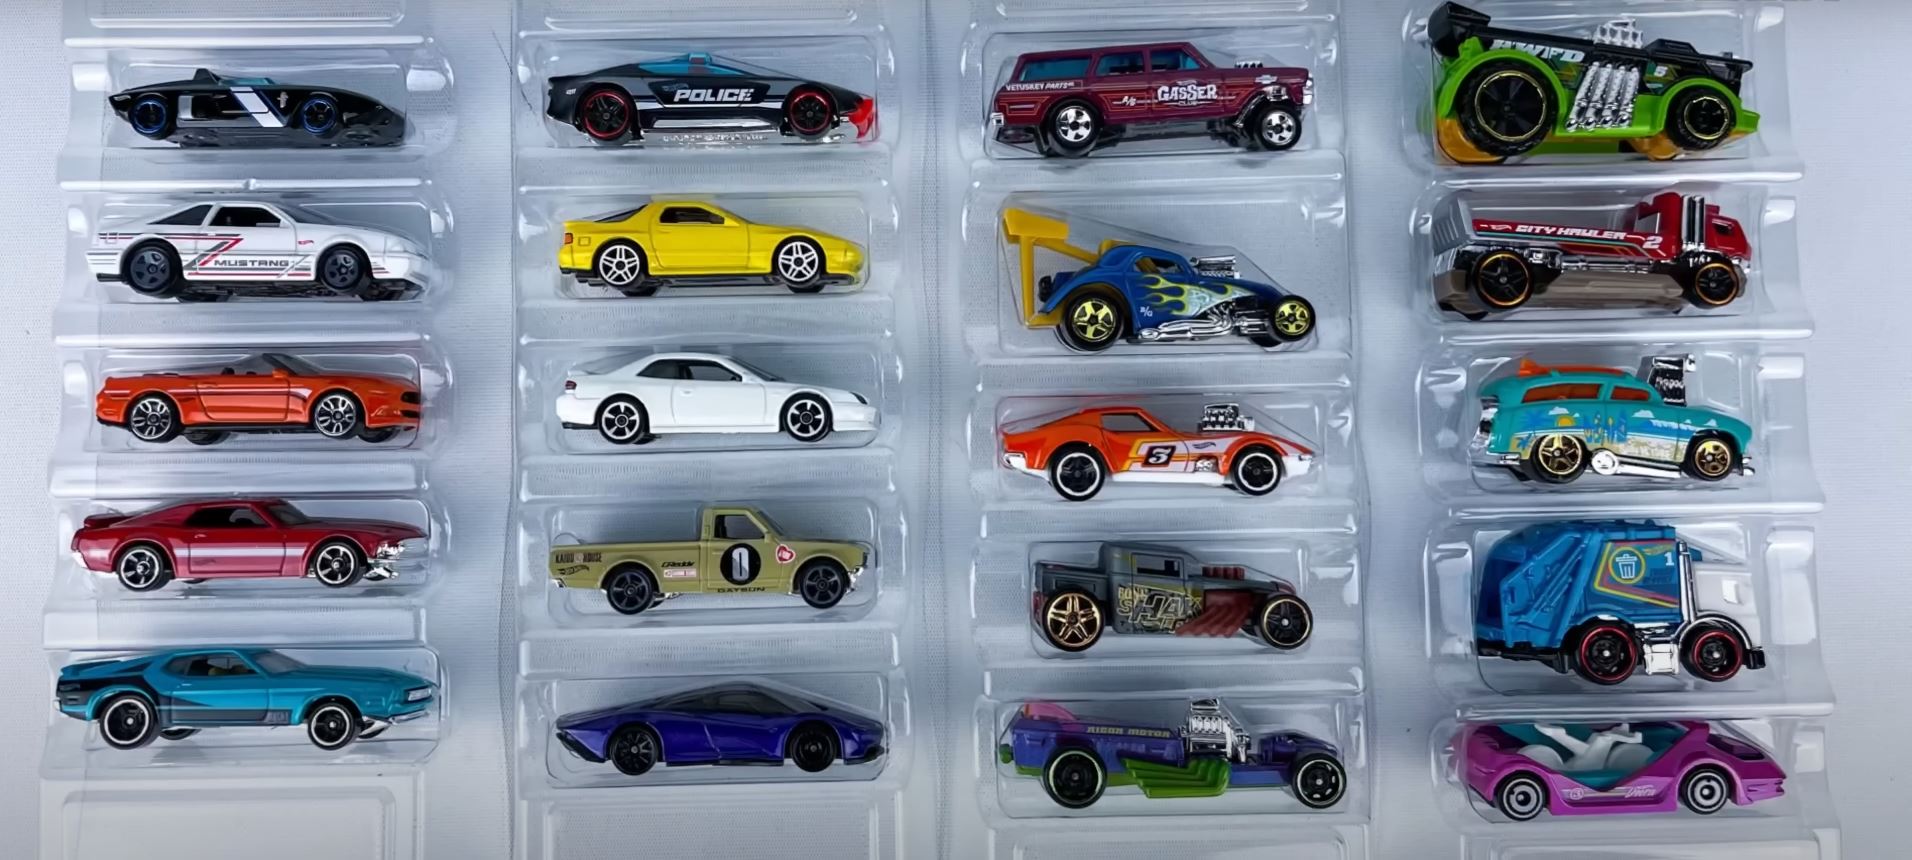 Hot Wheels Celebrates the Ford Mustang With a New 5-Pack, There